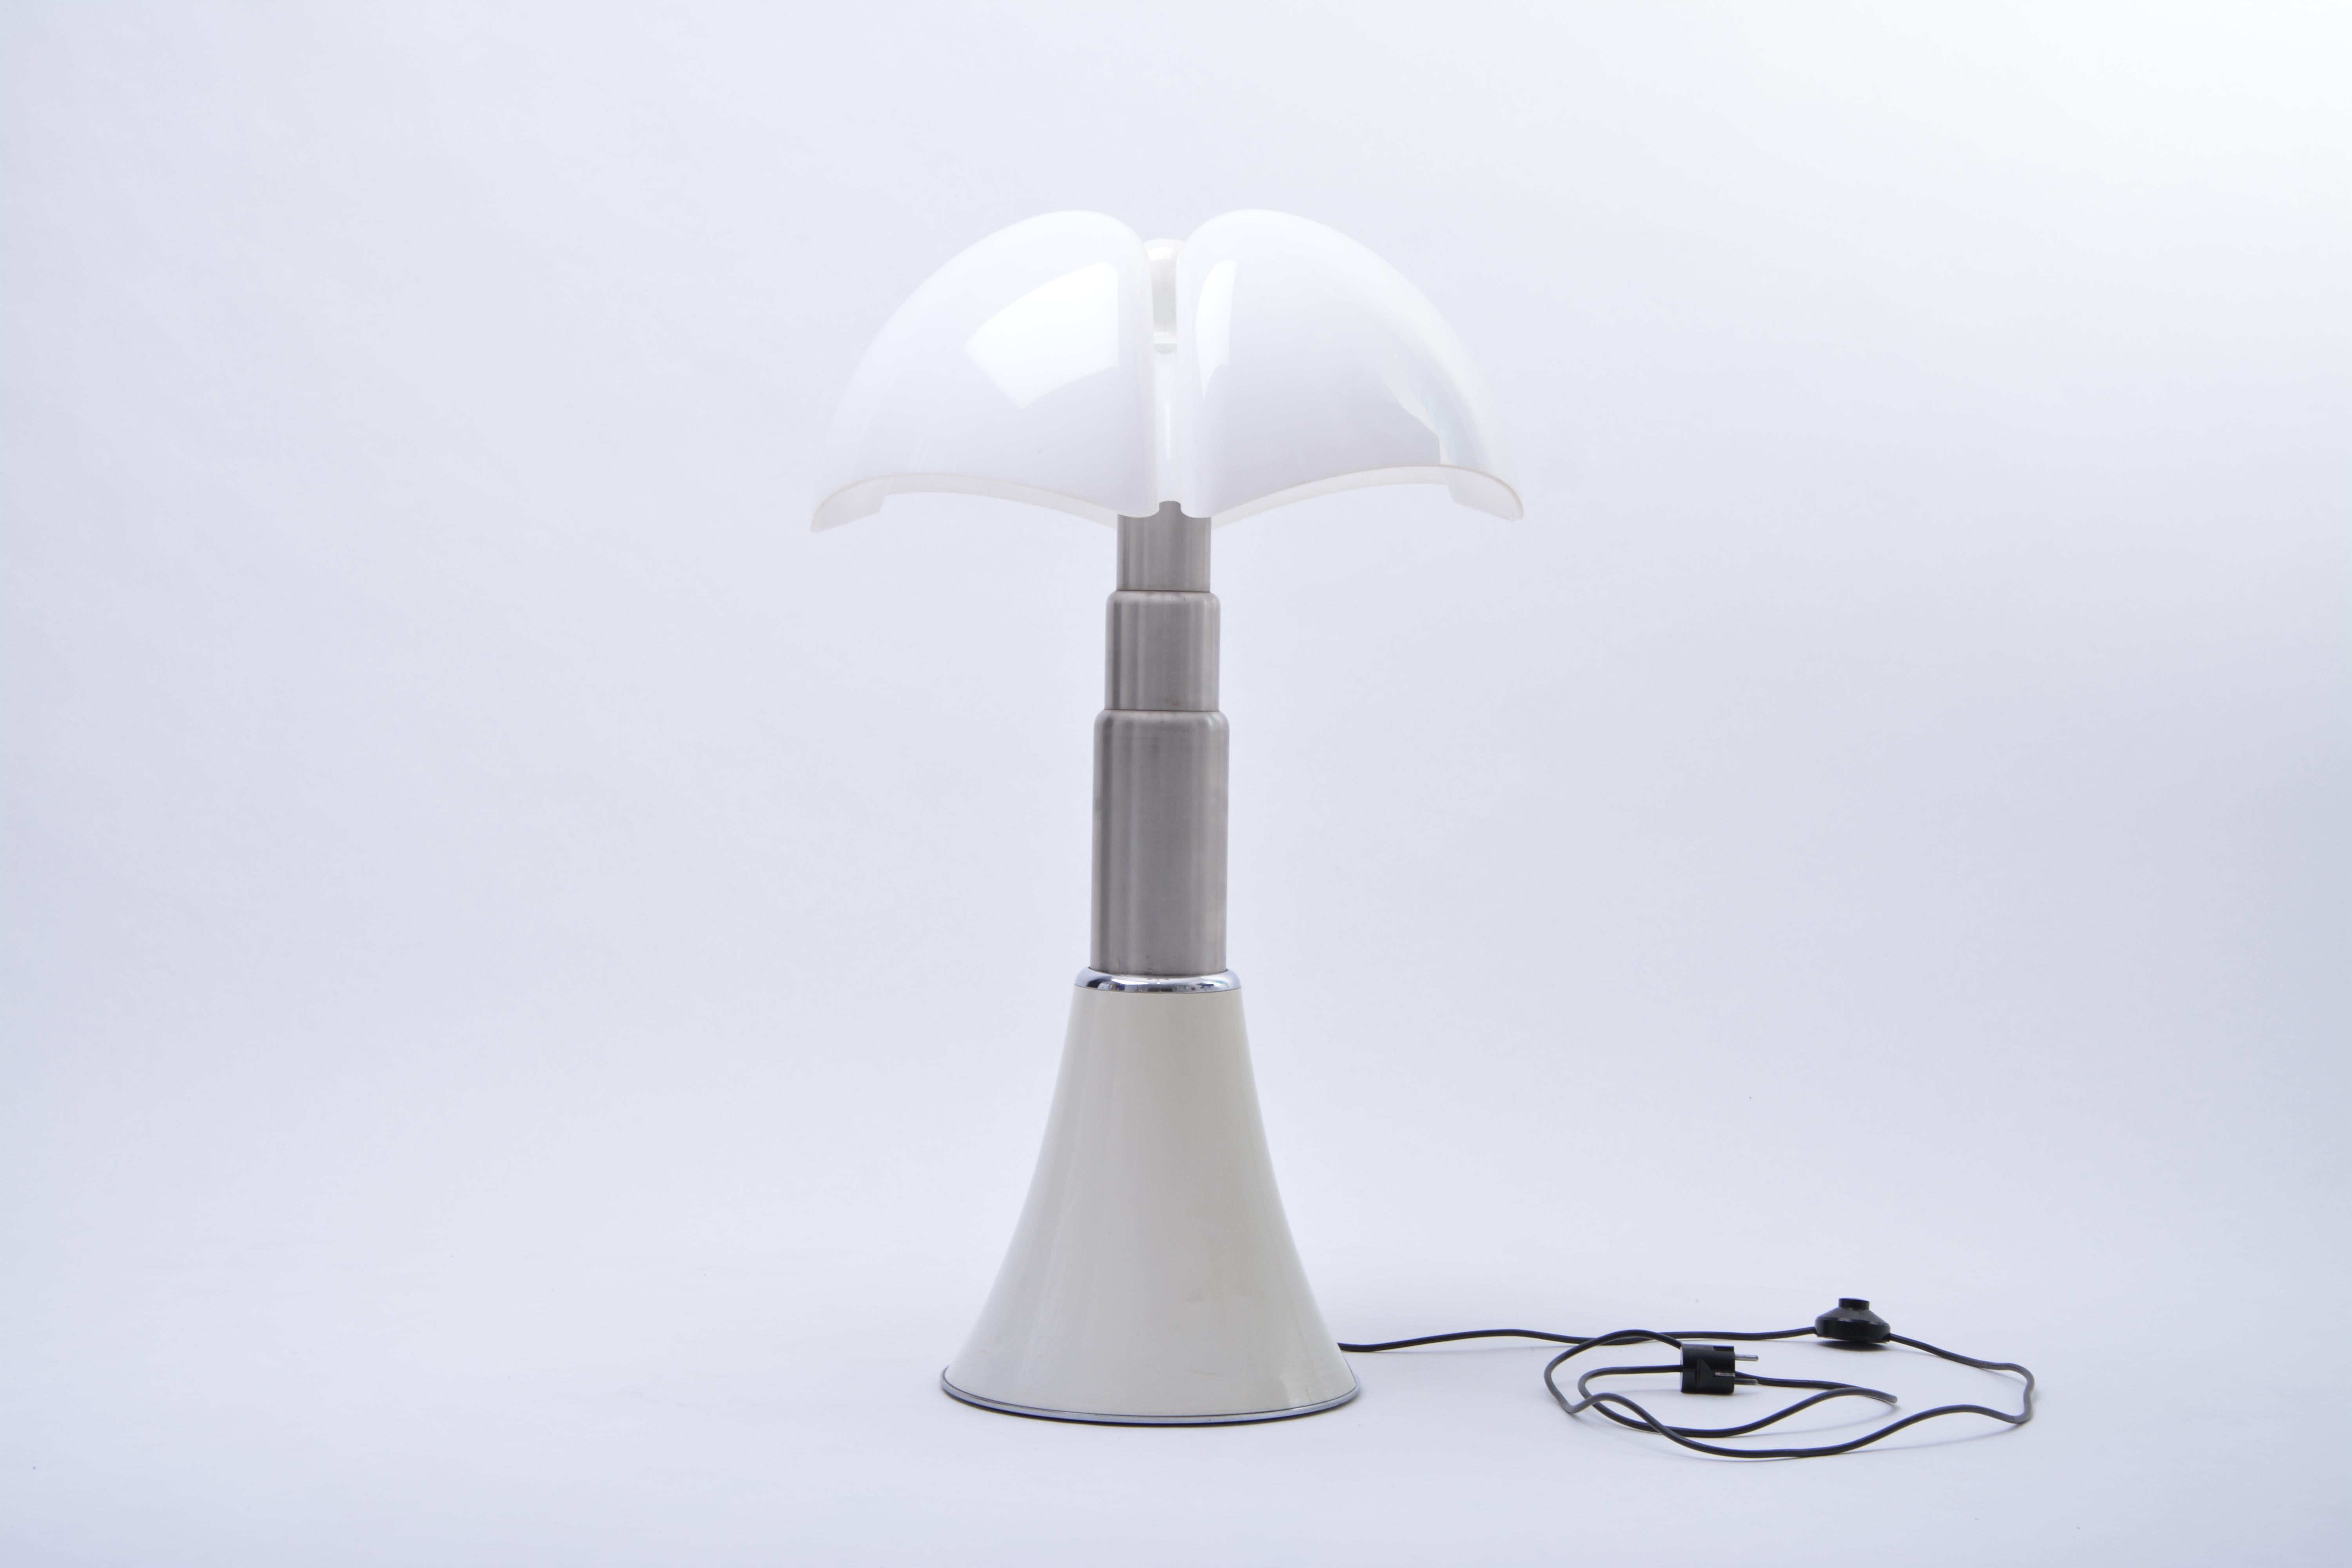 This iconic lamp designed by Gae Aulenti 1966 for Martinelli Luce is height adjustable by means of its stainless steel telescopic shaft. The shade is made of opal white plastic. Under the shade it has four light sockets. Height is adjustable from 72